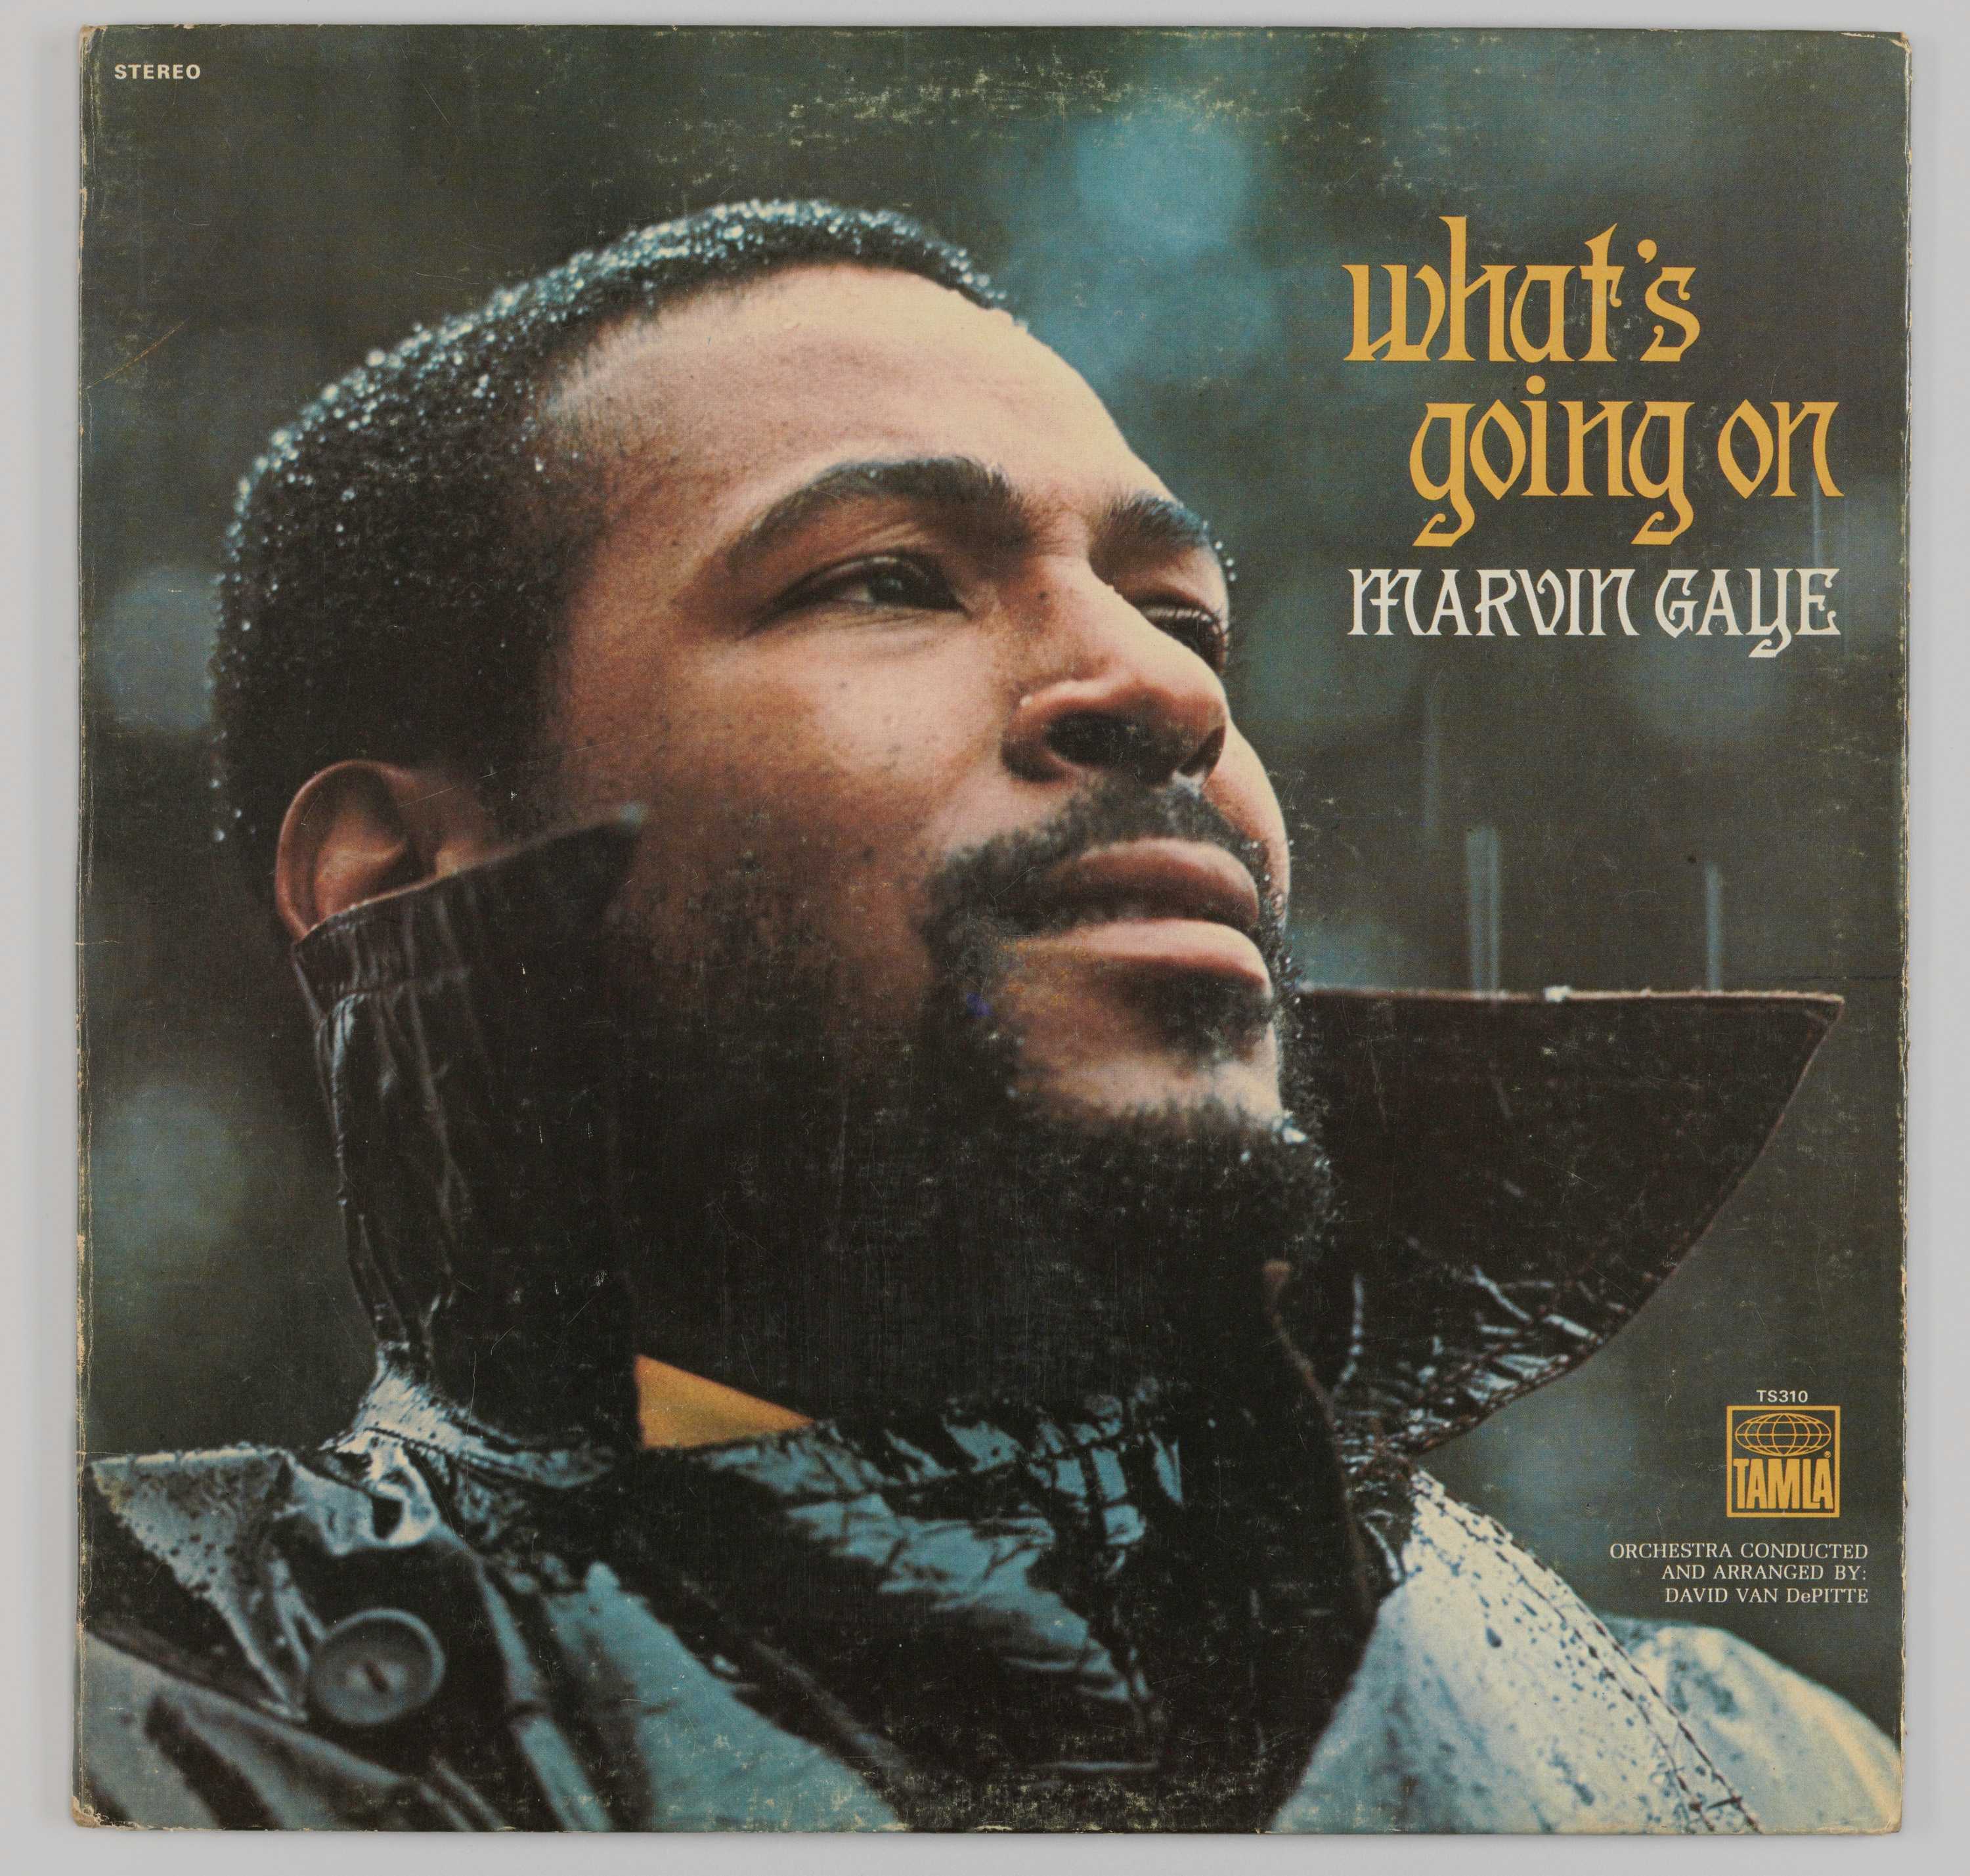 Image of the album jacket for Marvin Gaye's record "What's Going On," featuring a photograph of Marvin Gaye.